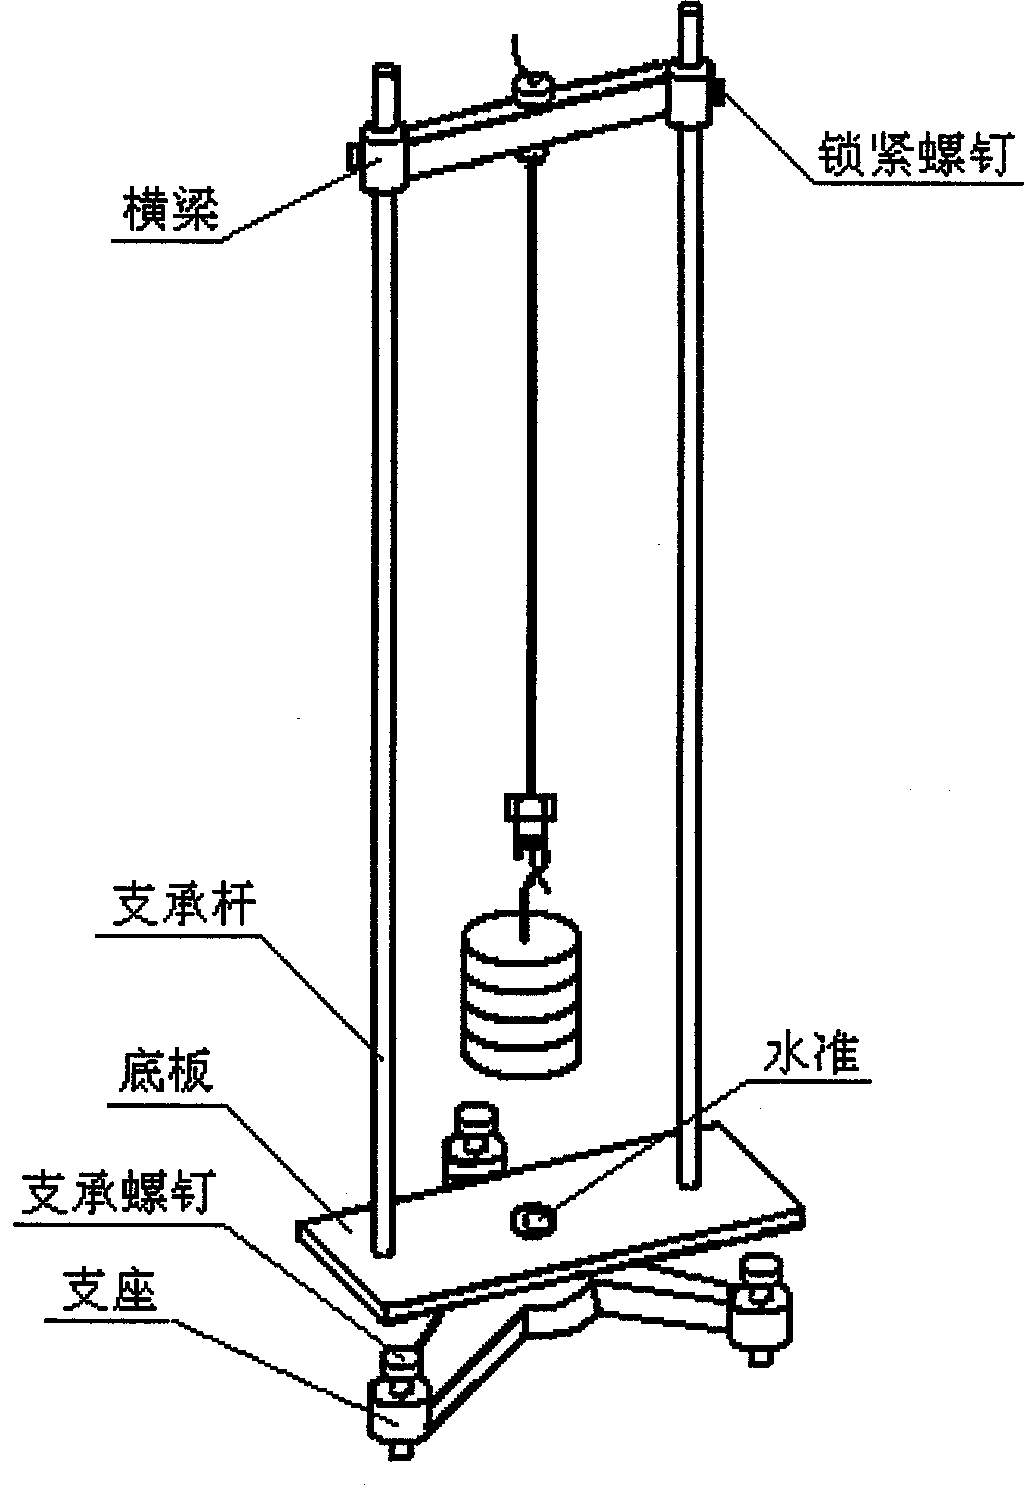 Device and method for measuring elasticity modulus of metallic material